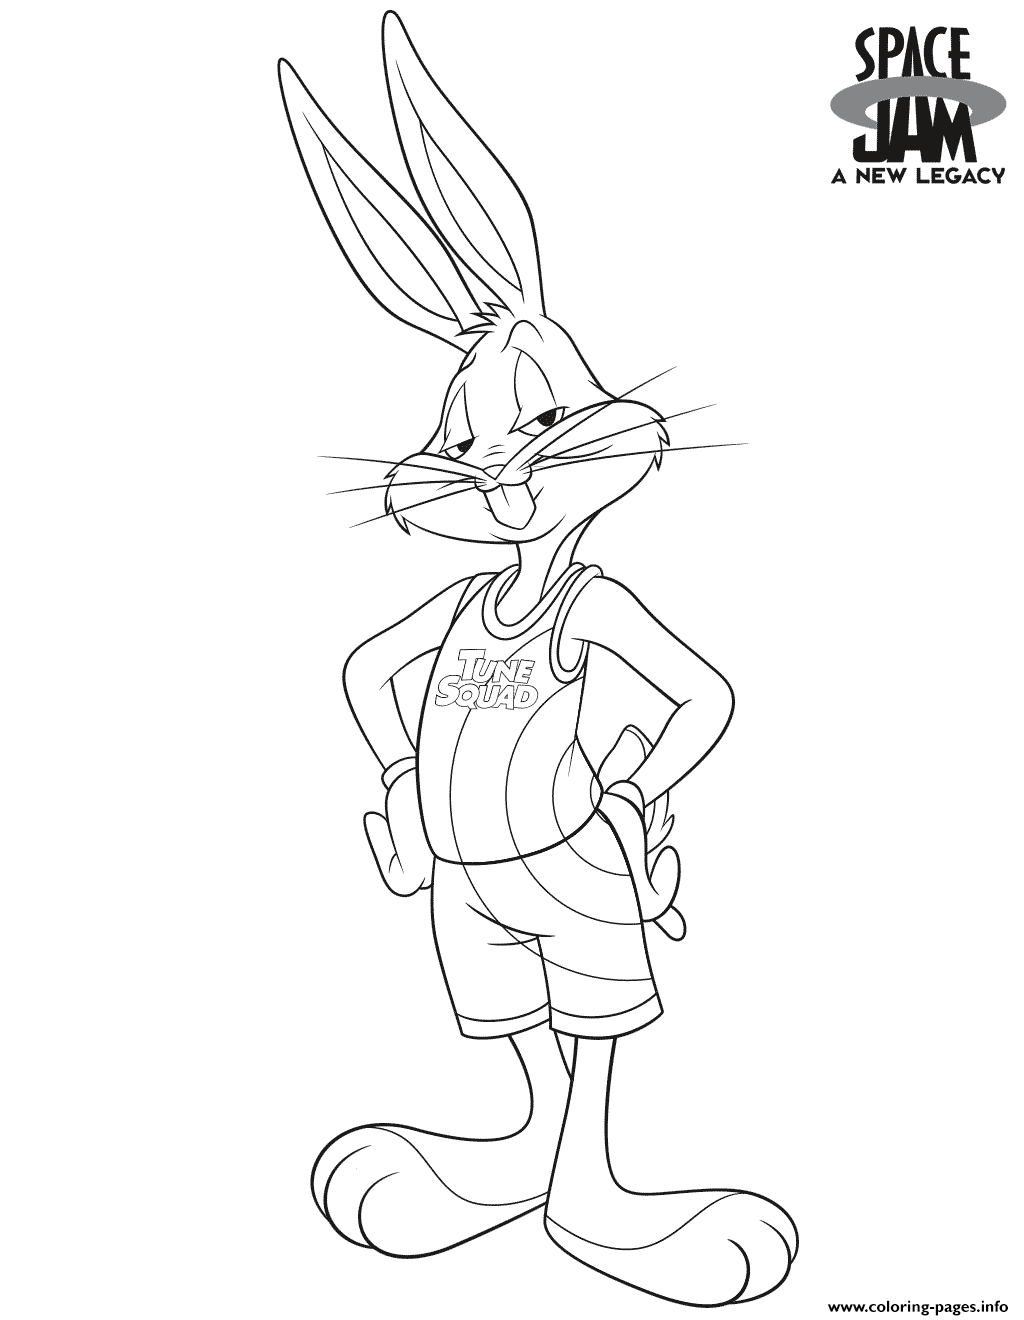 Space Jam Lola Bunny Coloring Page Printable | vlr.eng.br